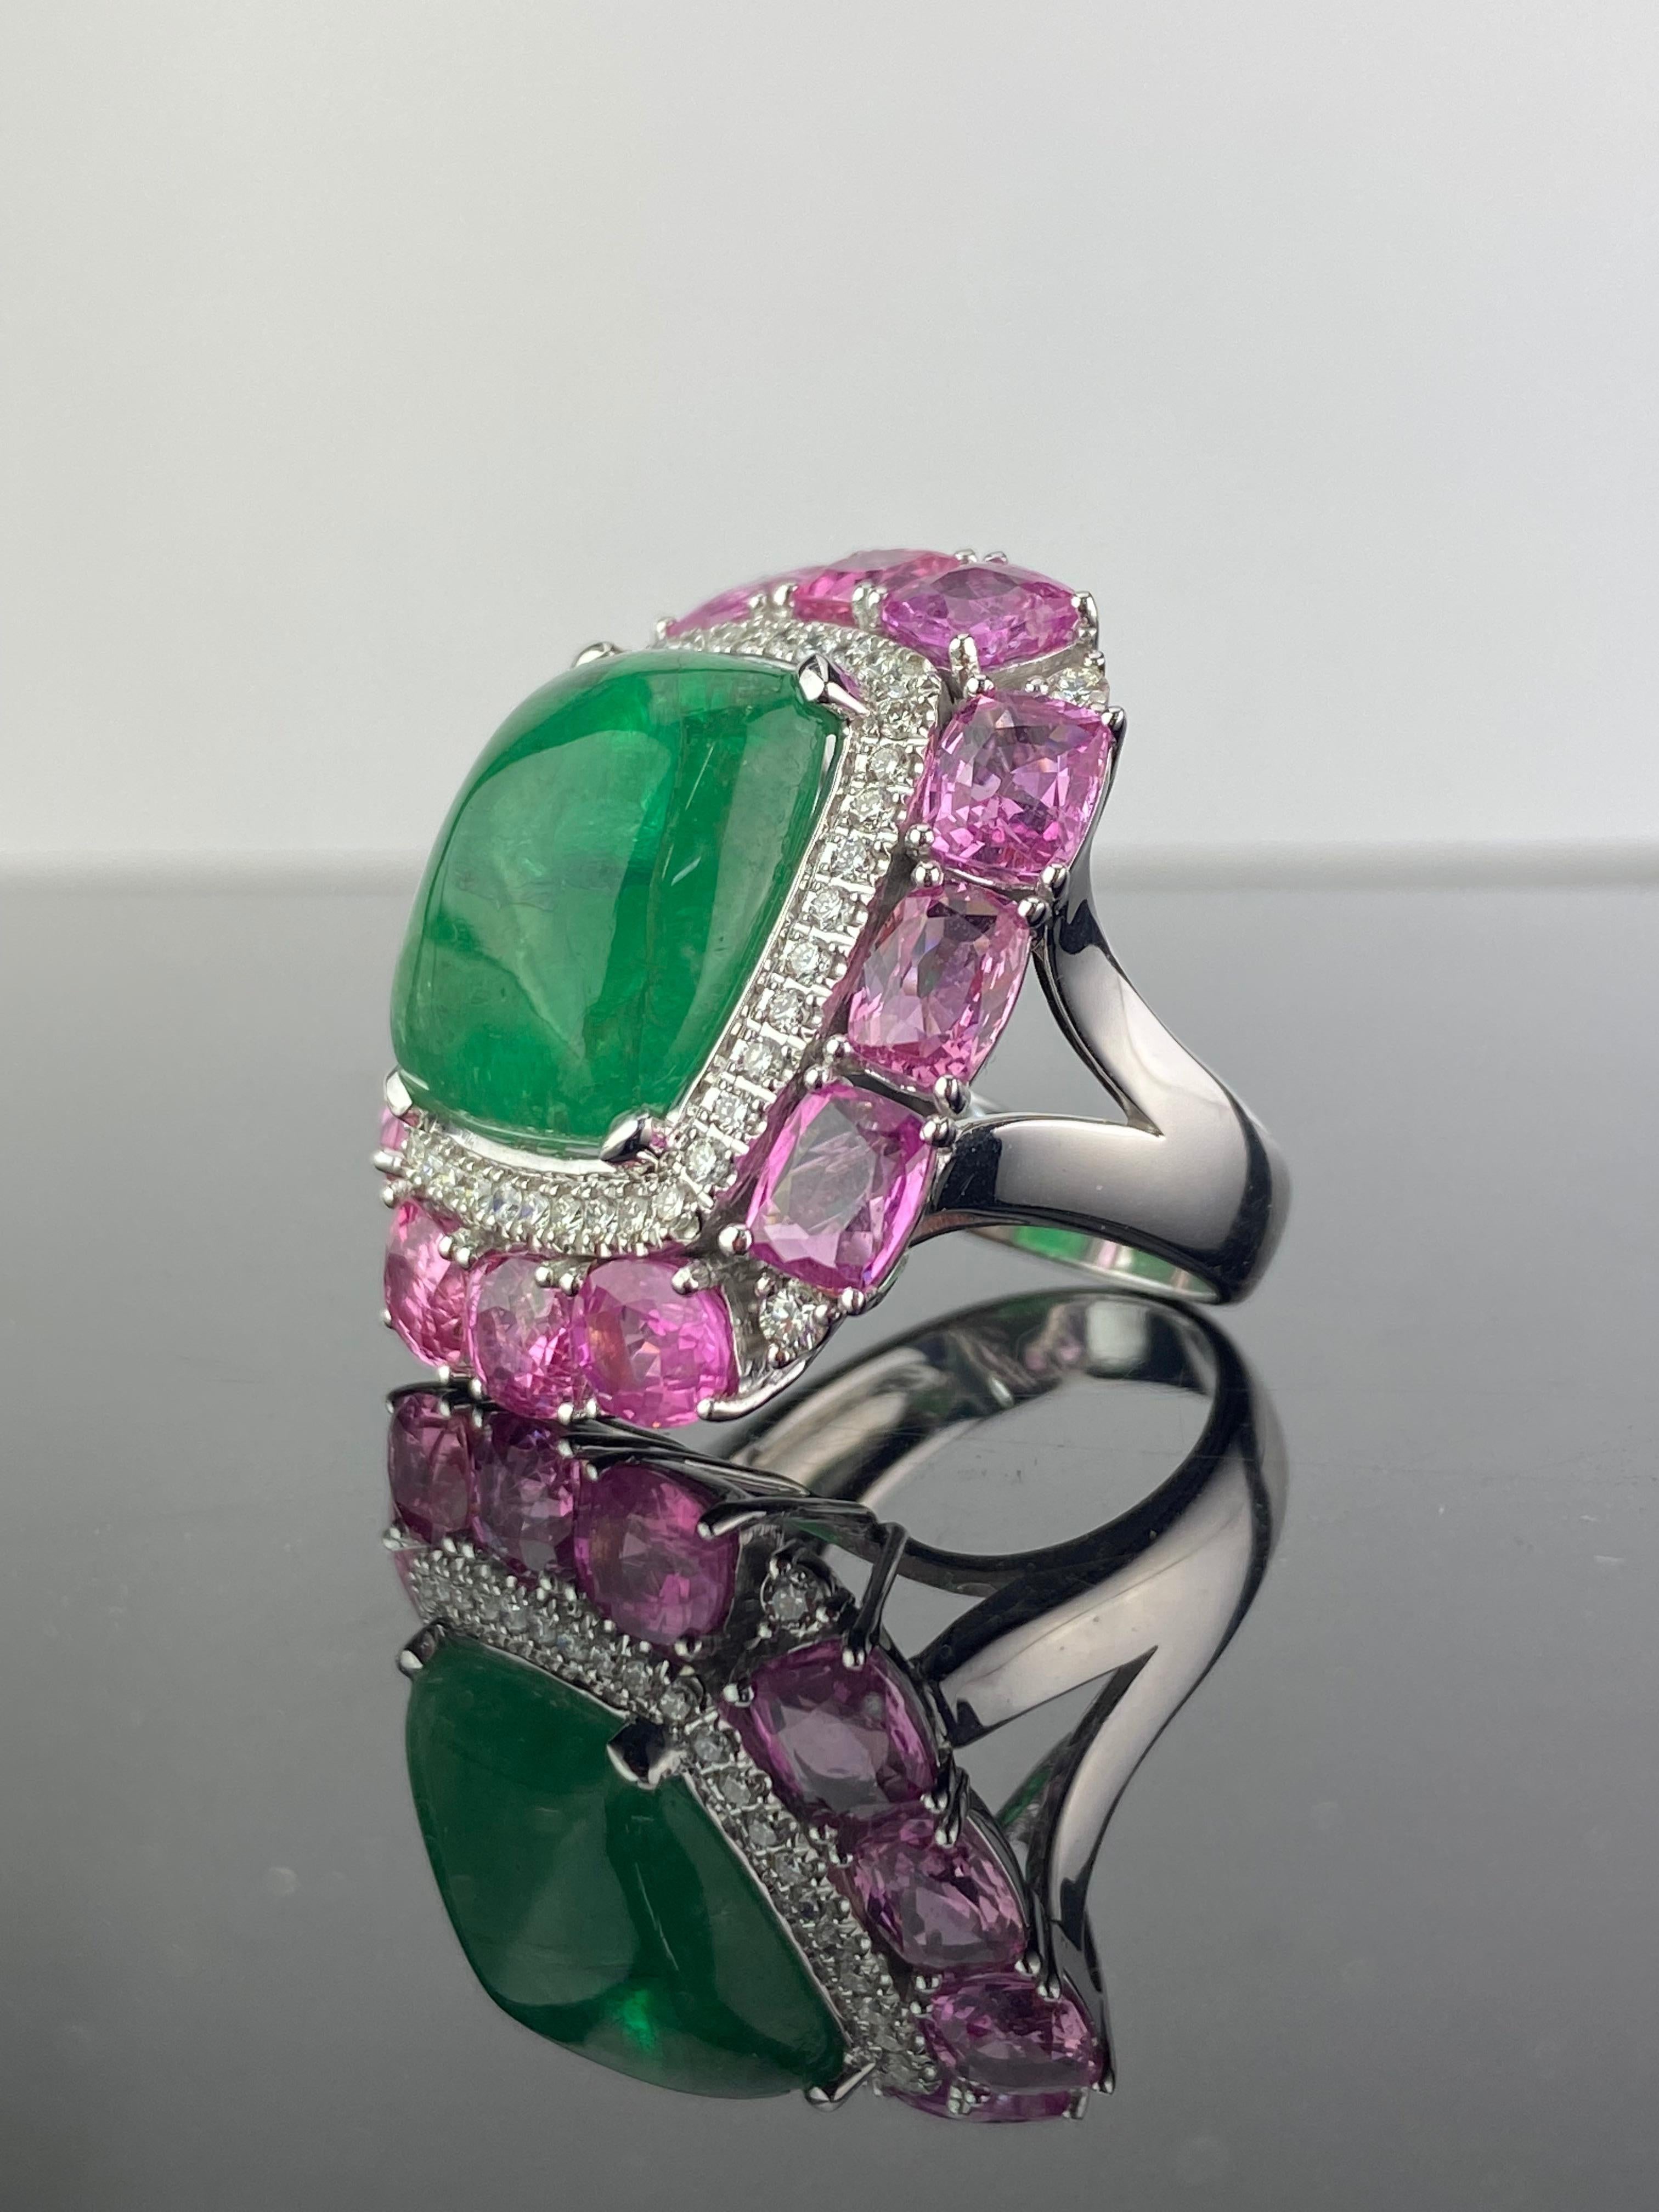 A beautiful 14.35 carat sugarloaf cabochon shaped Zambian Emerald and 9.02 carat Pink Sapphire, White Diamond cocktail ring. The Emerald has an ideal vivid green color, and the Pink Sapphire is completely transparent with great color and luster. The